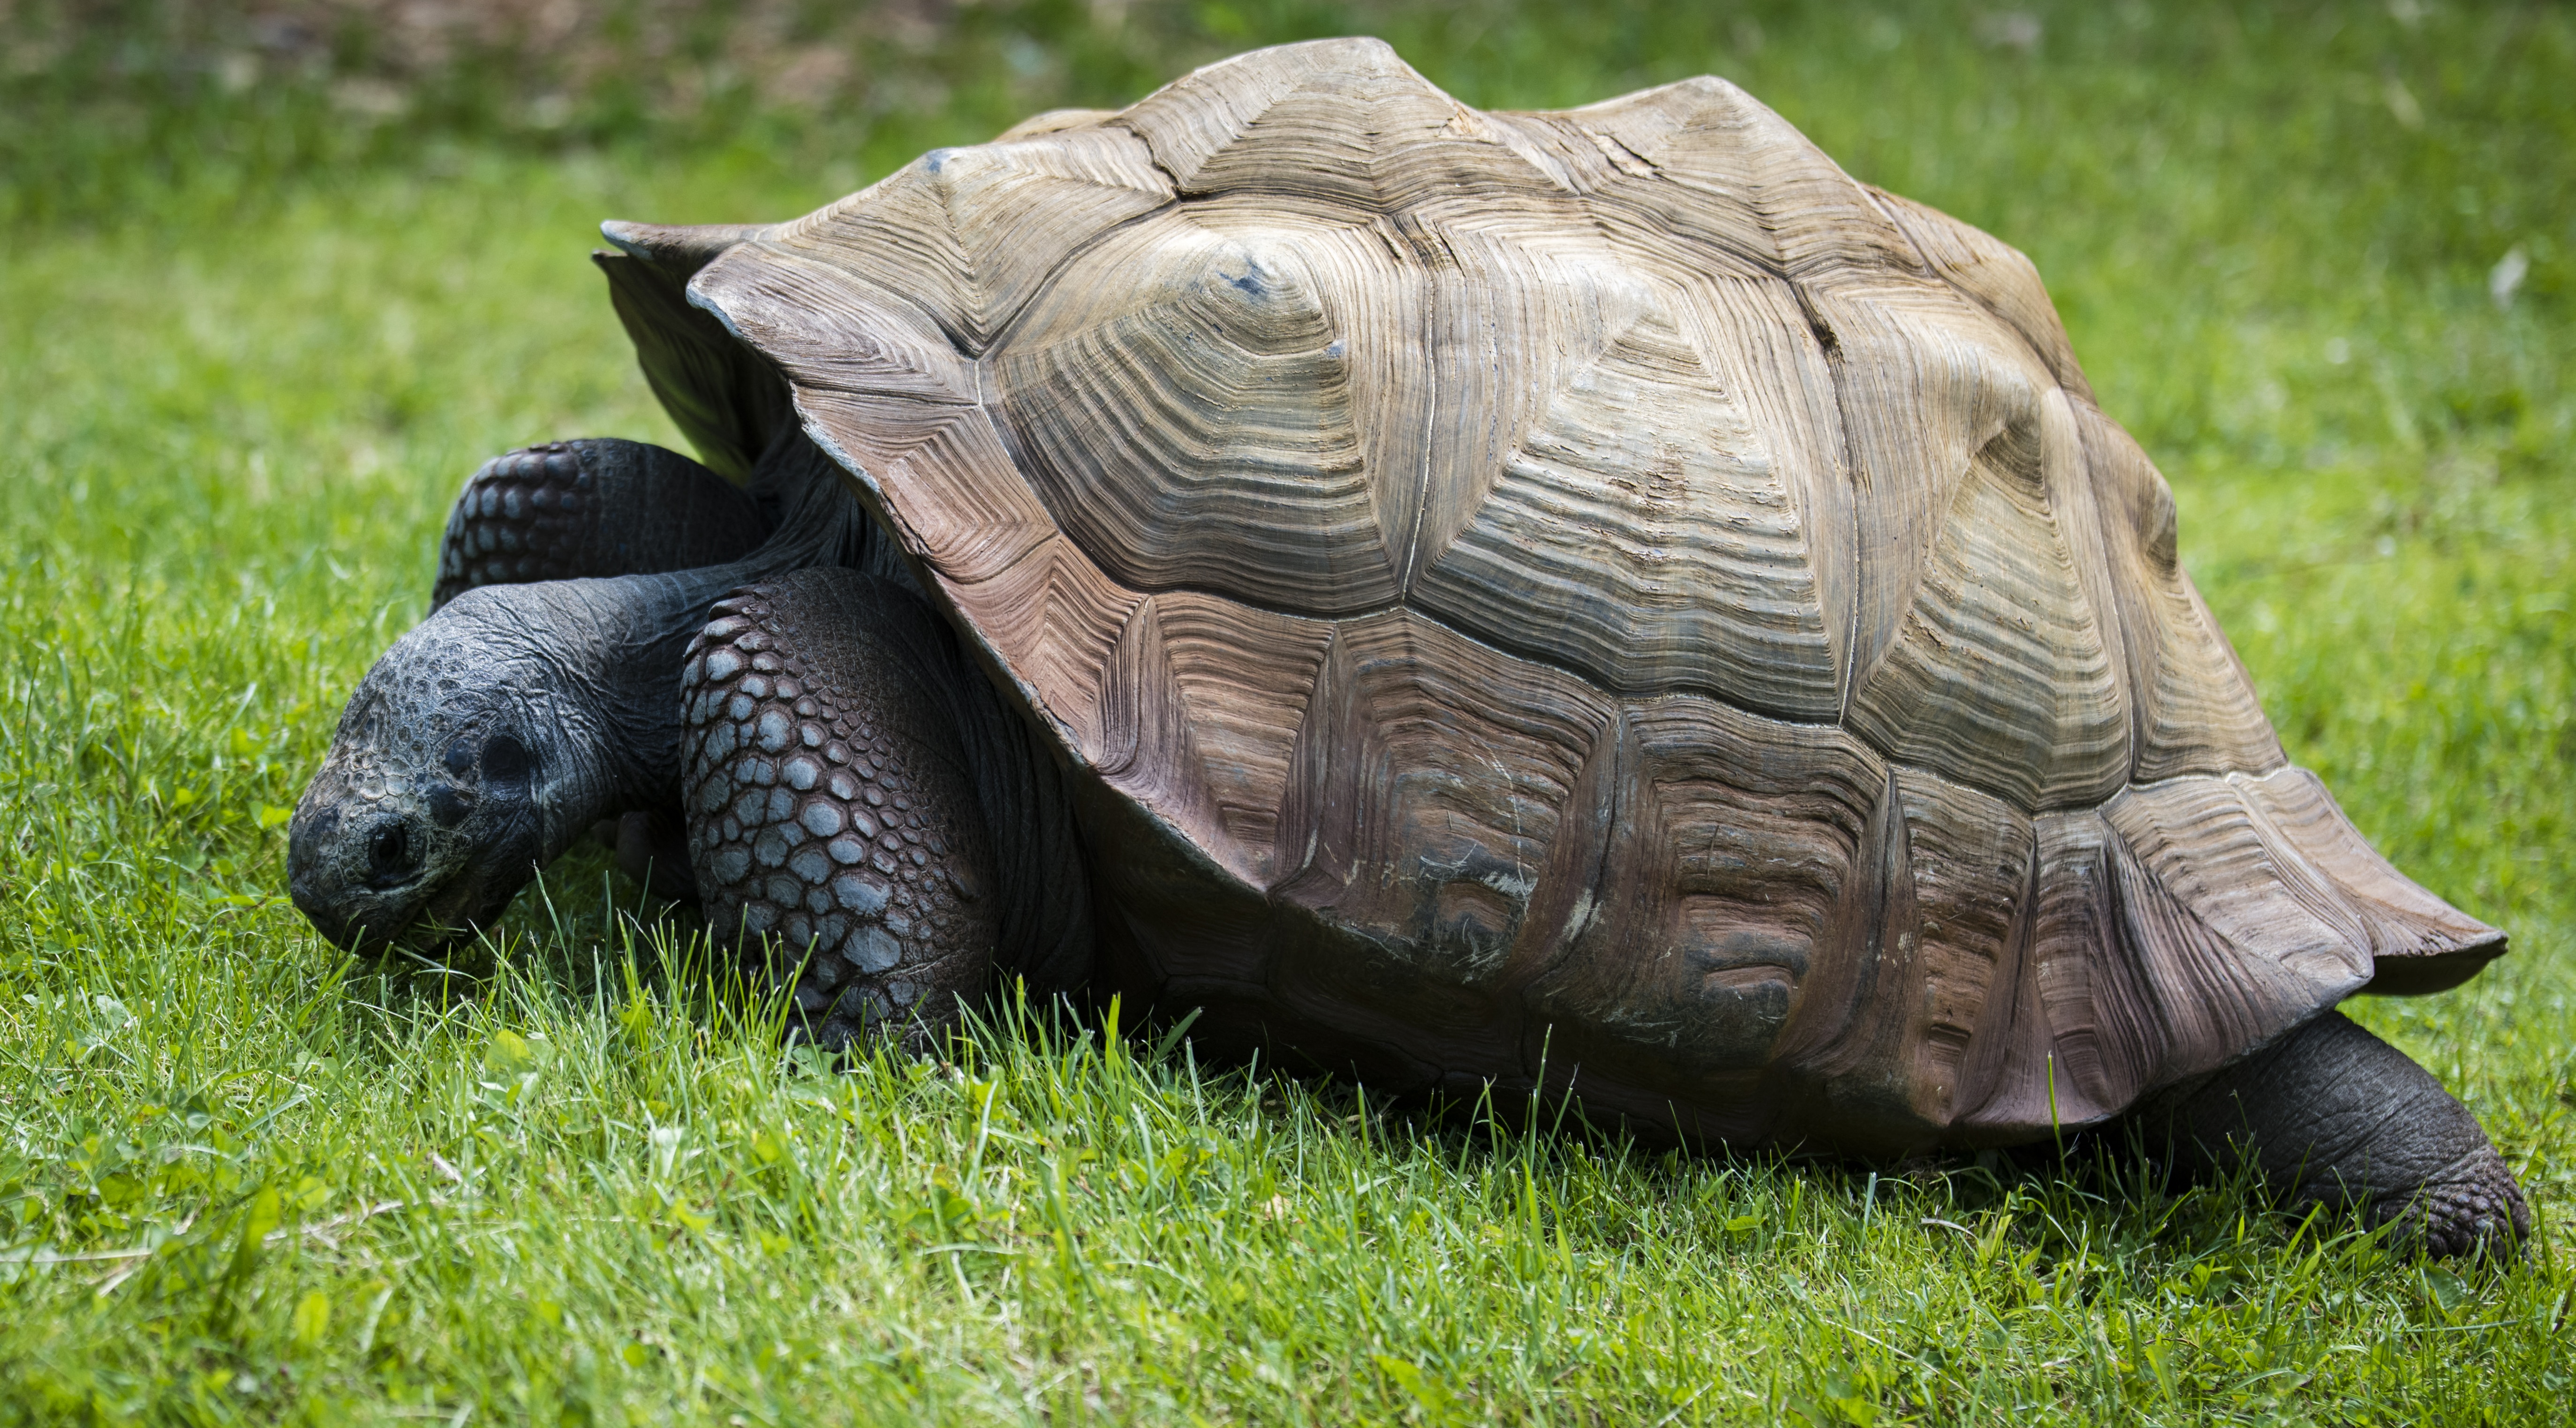 wild life photography of brown and black tortoise in green grass